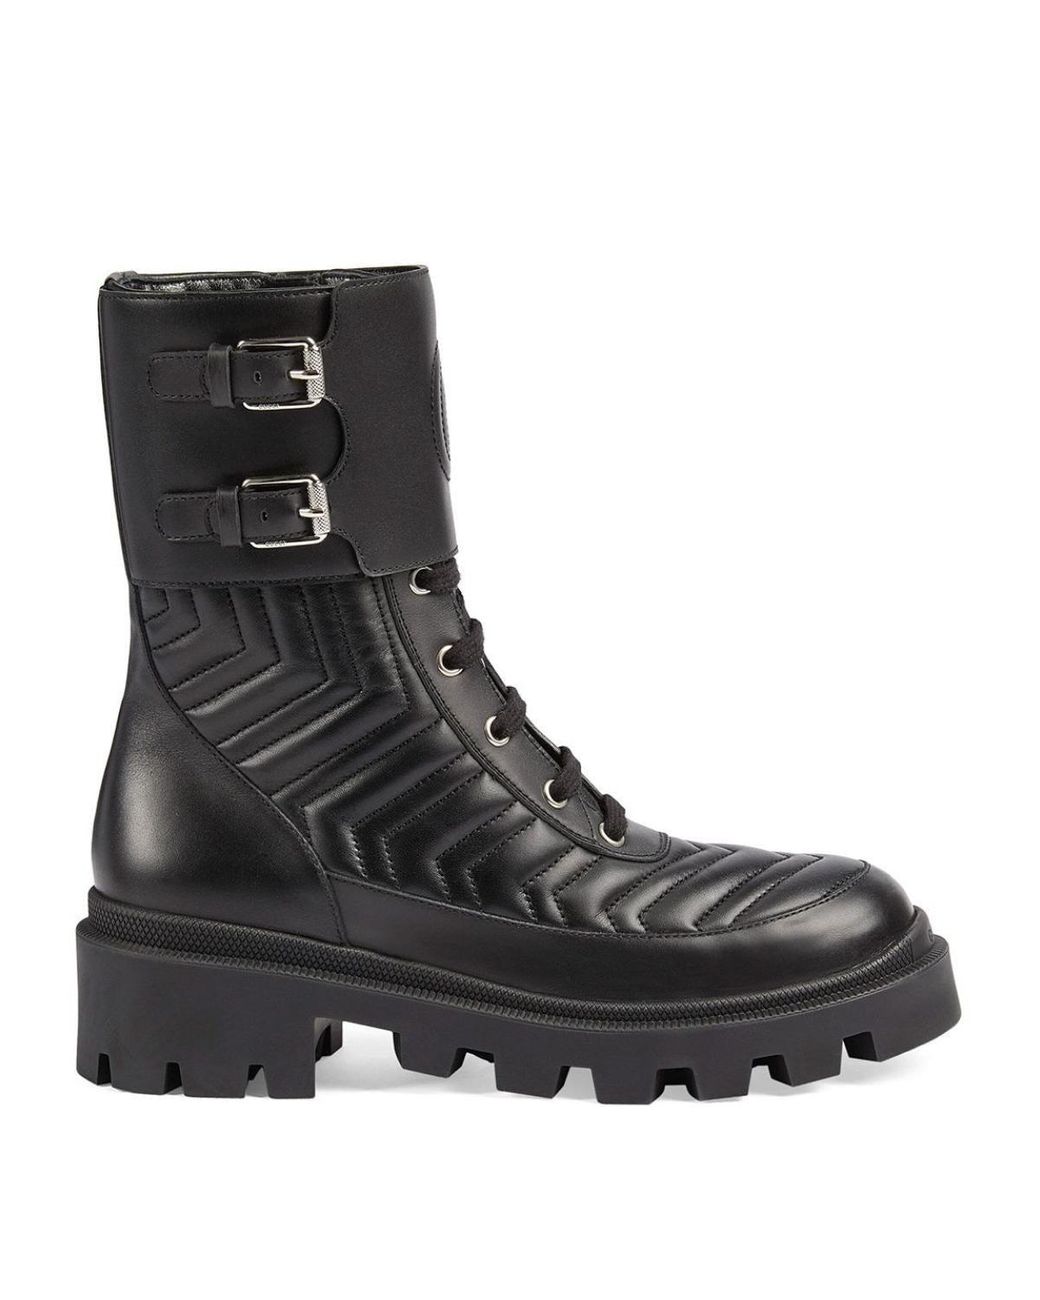 Gucci Interlocking G Leather Boots in Black | Lyst UK